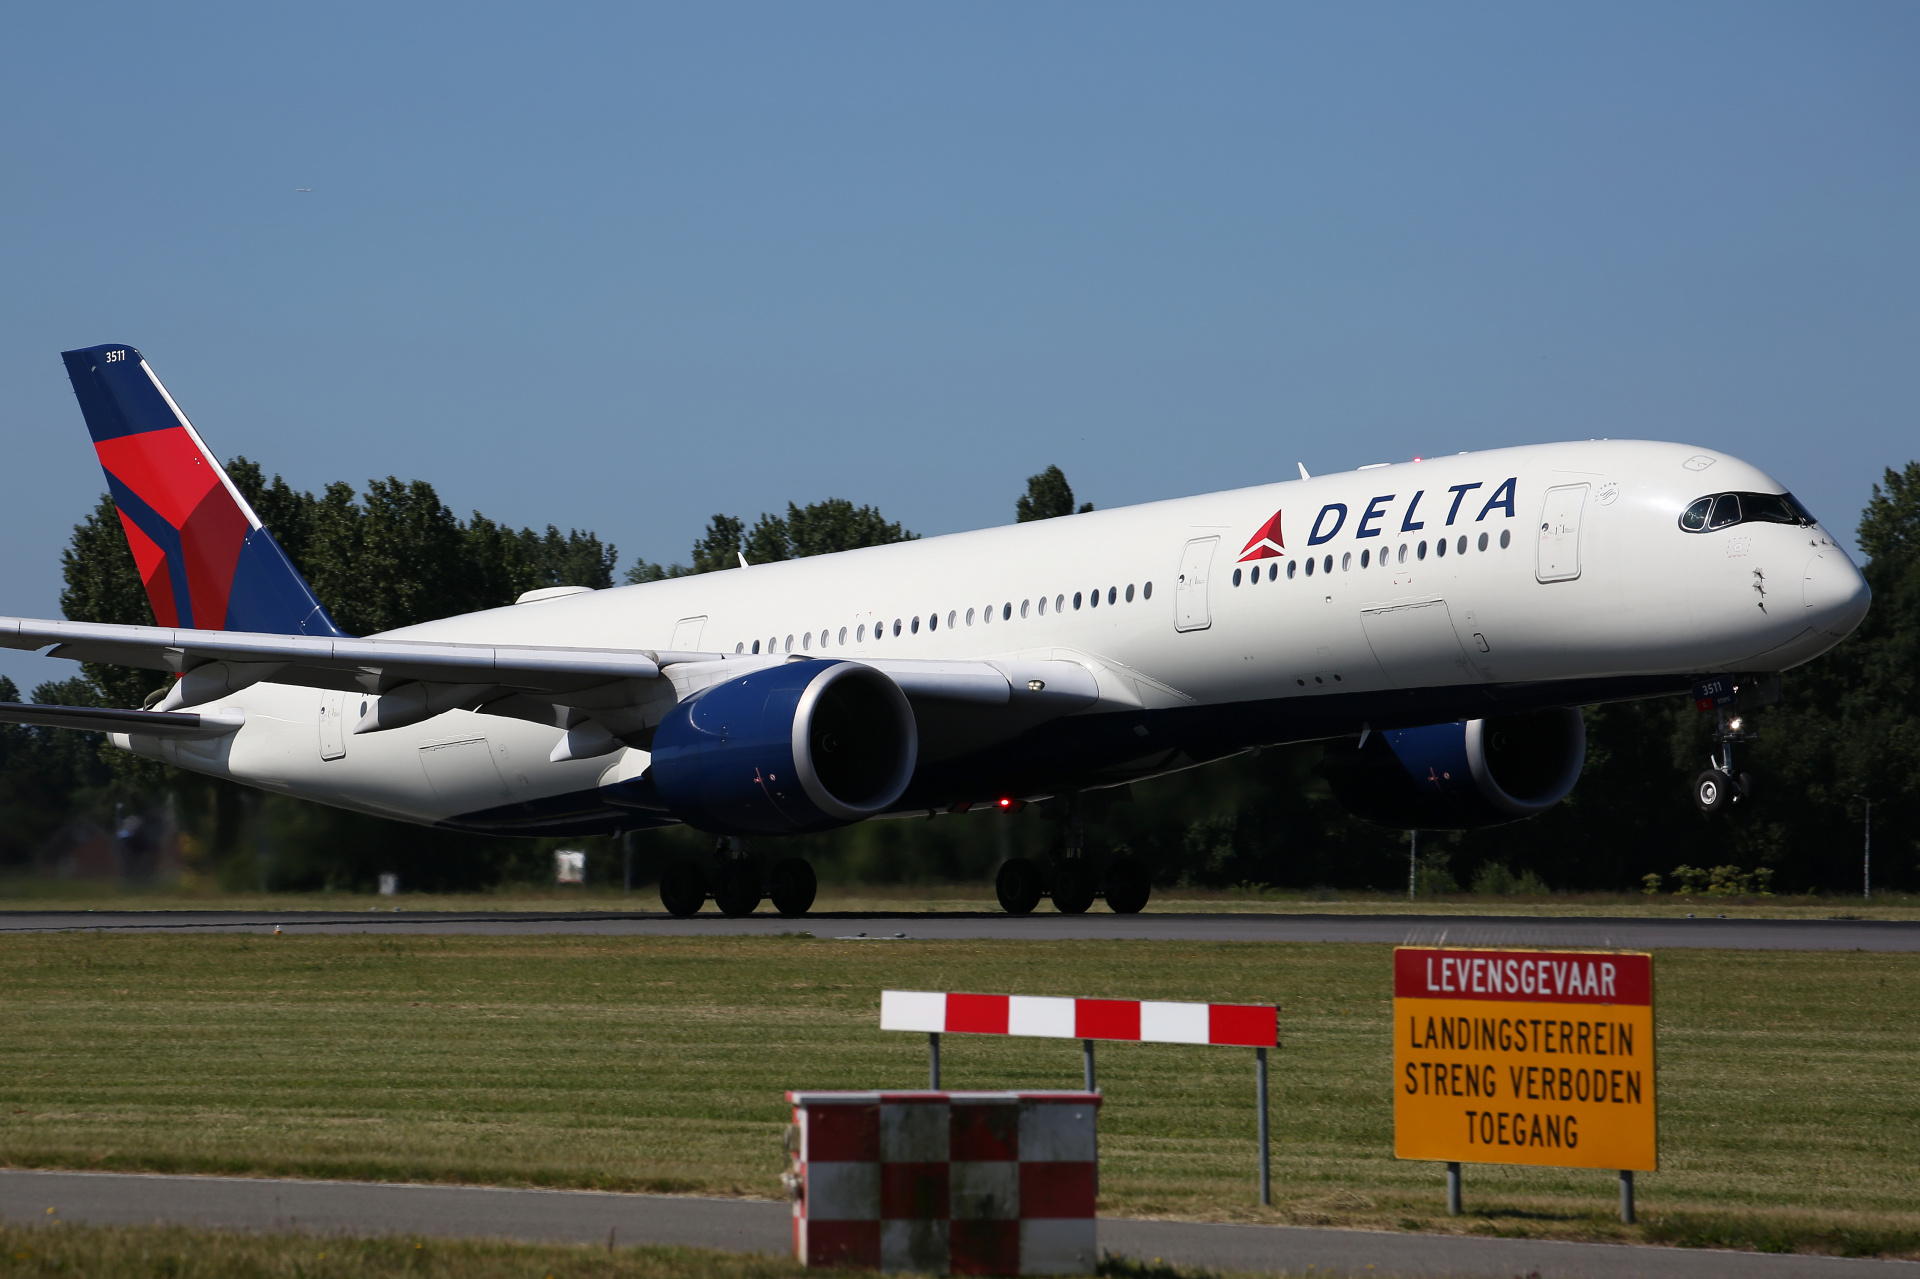 N511DN (Aircraft » Schiphol Spotting » Airbus A350-900 » Delta Airlines)